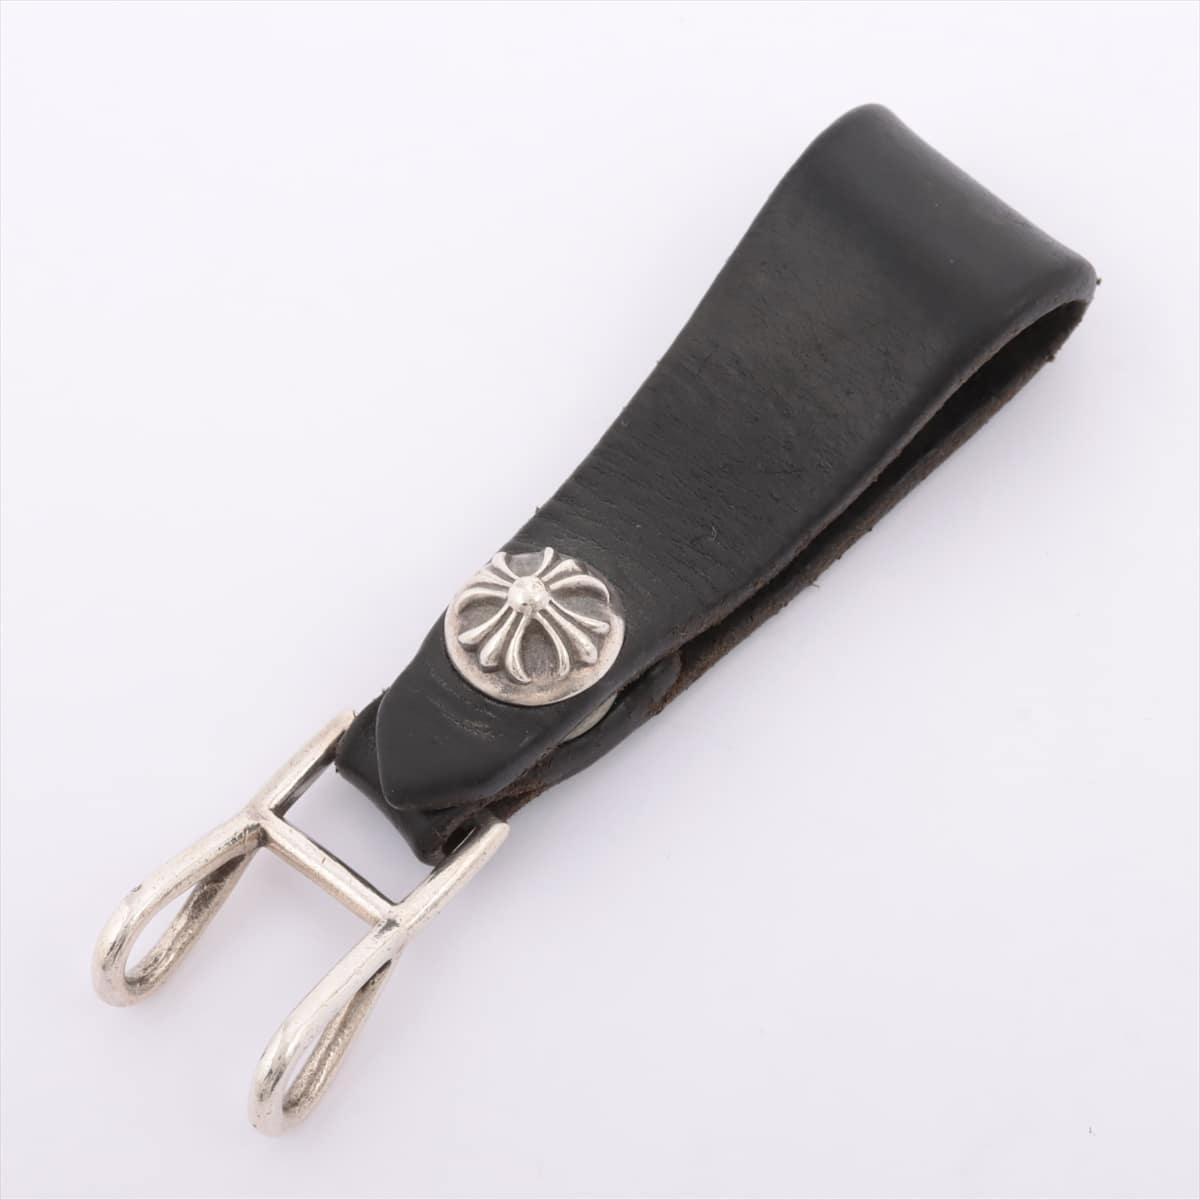 Chrome Hearts W belt loop Keyring Leather & 925 23.9g With invoice